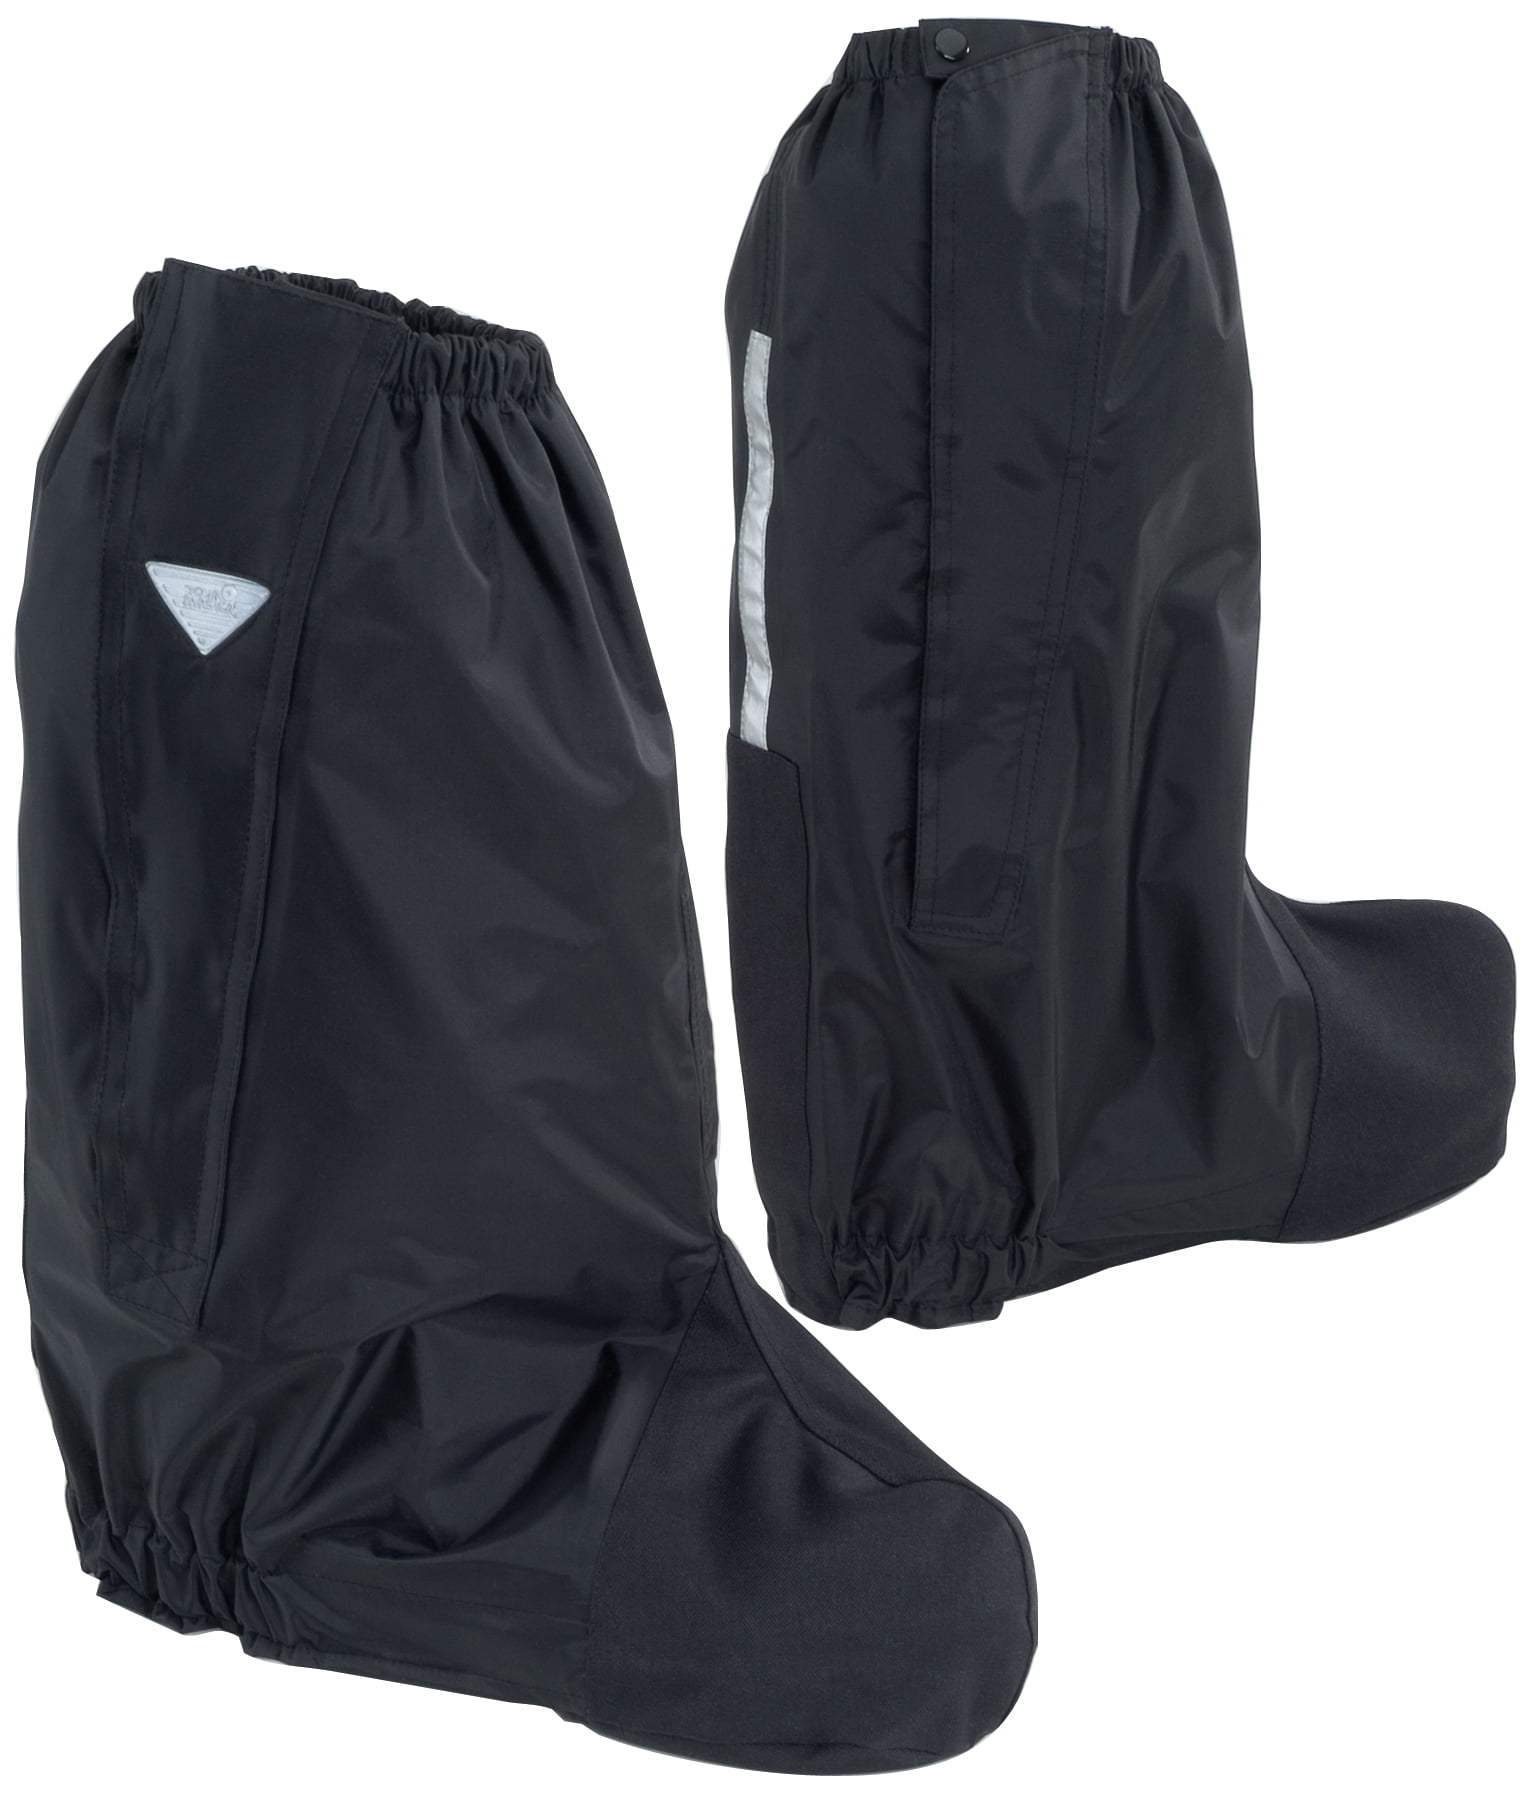 Tourmaster Deluxe Rain Boot Covers 